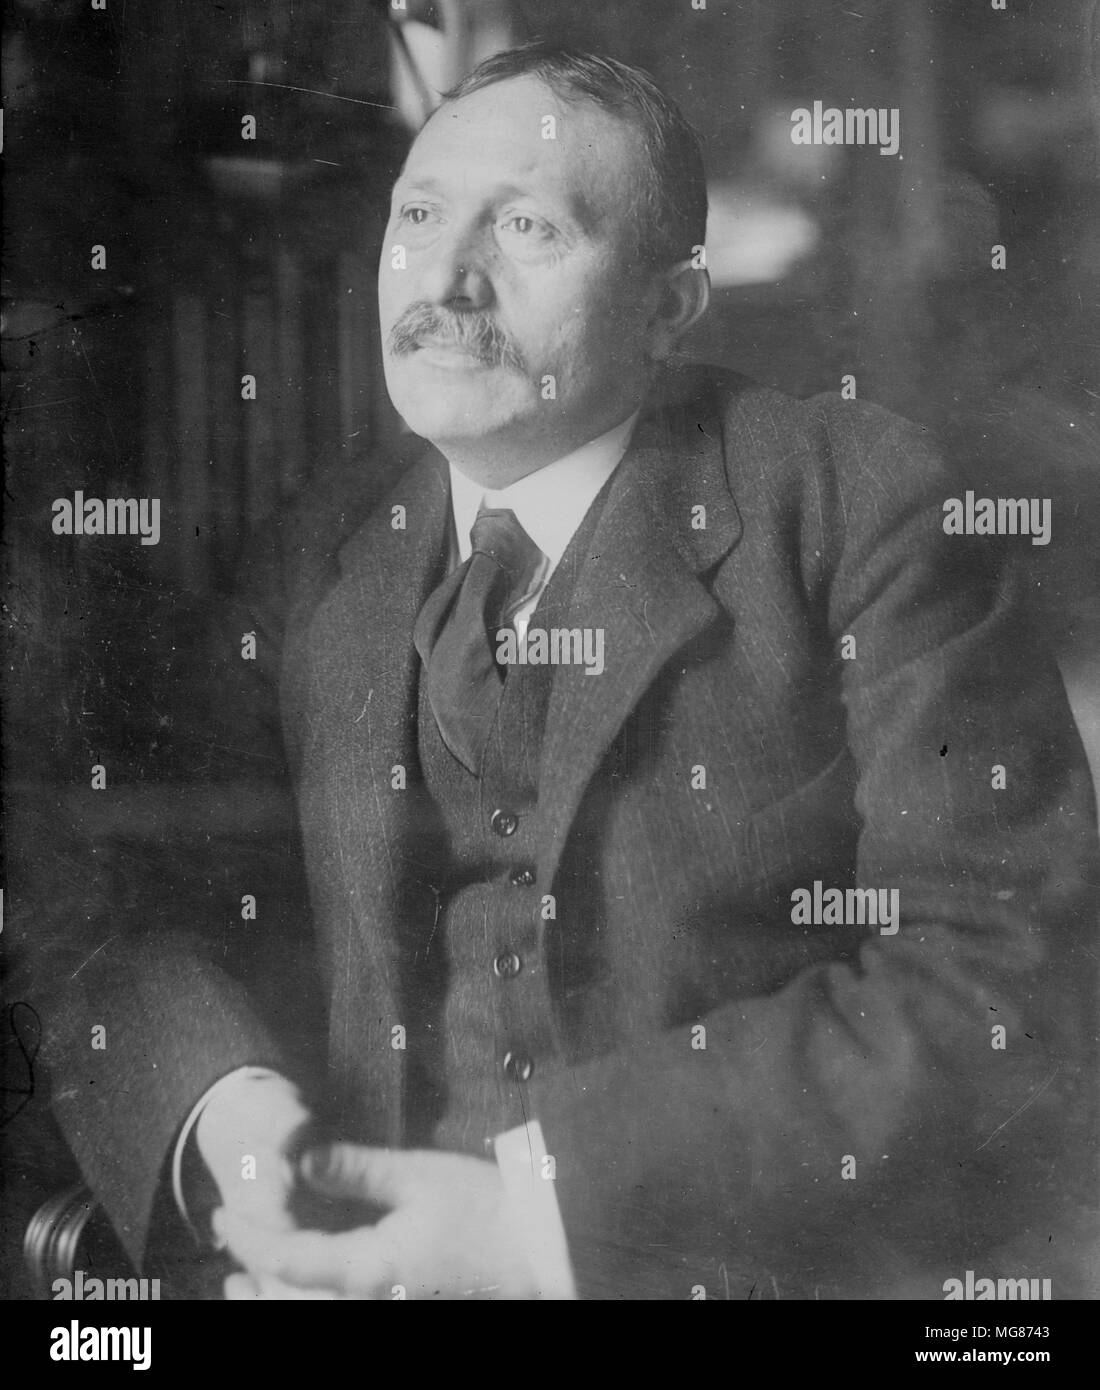 Jean Raphaël Adrien René Viviani (1863 – 1925) French politician of the Third Republic, who served as Prime Minister for the first year of World War I. Stock Photo